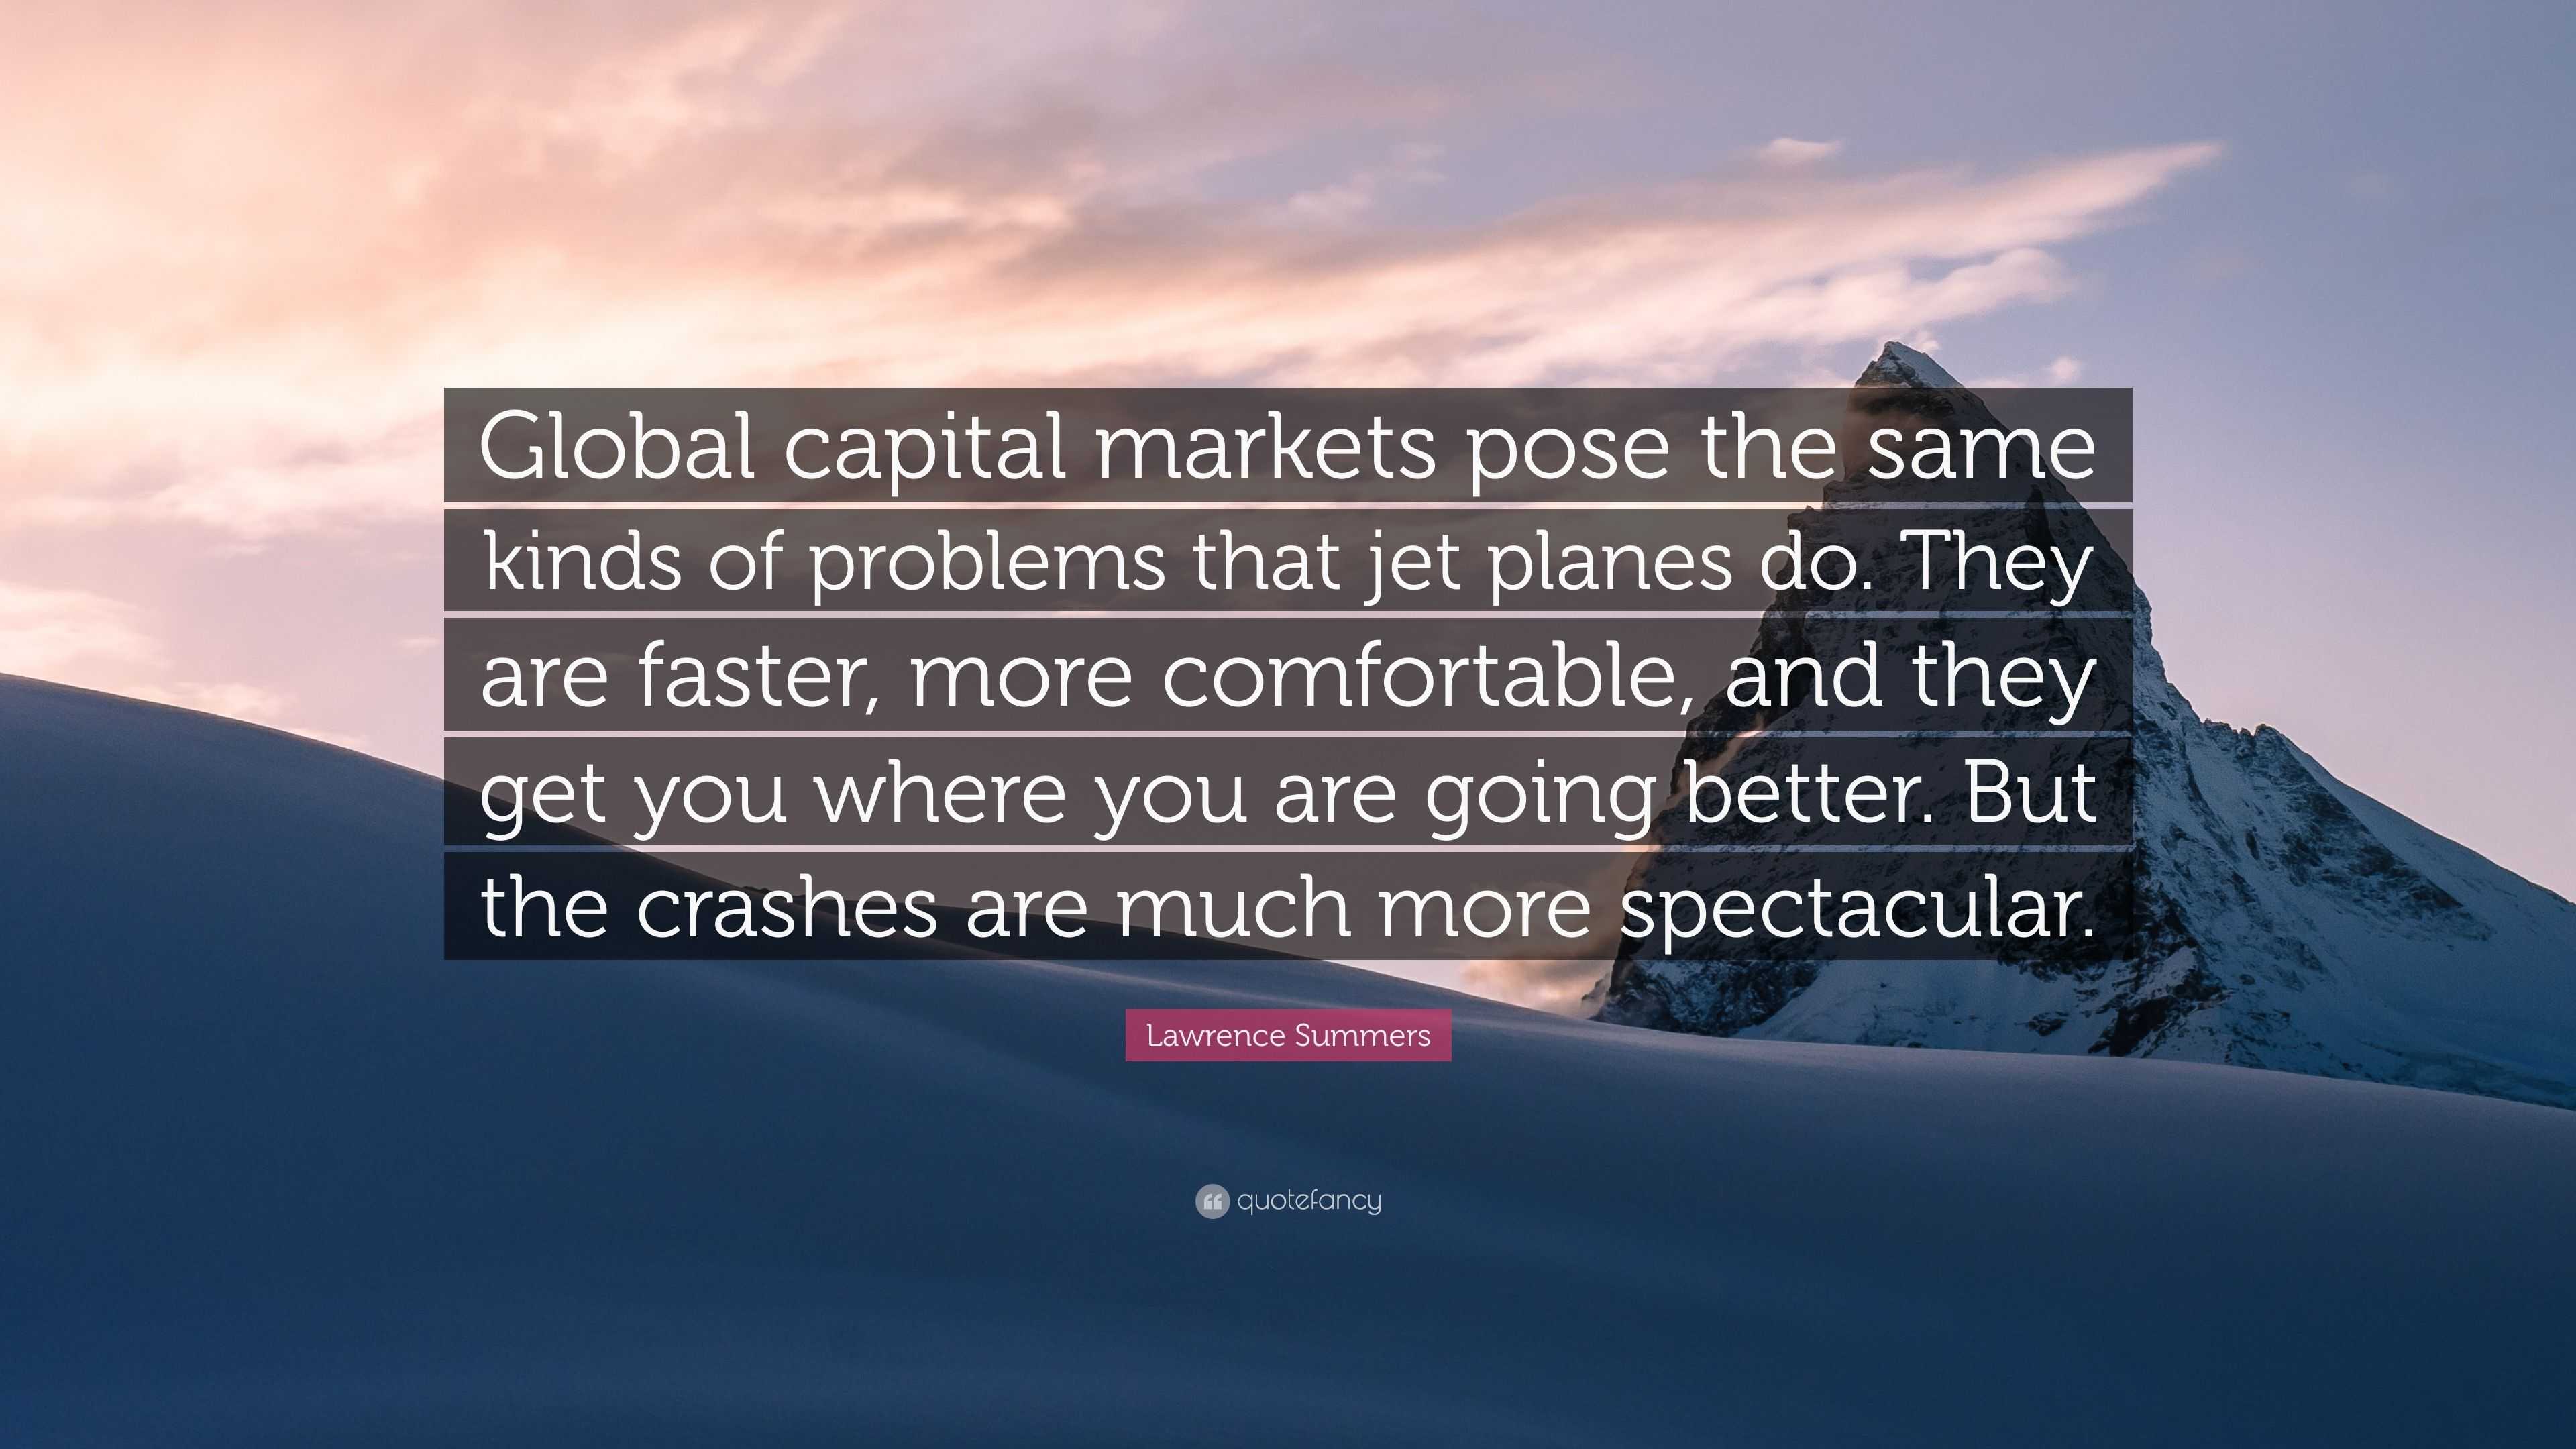 3323113 Lawrence Summers Quote Global capital markets pose the same kinds